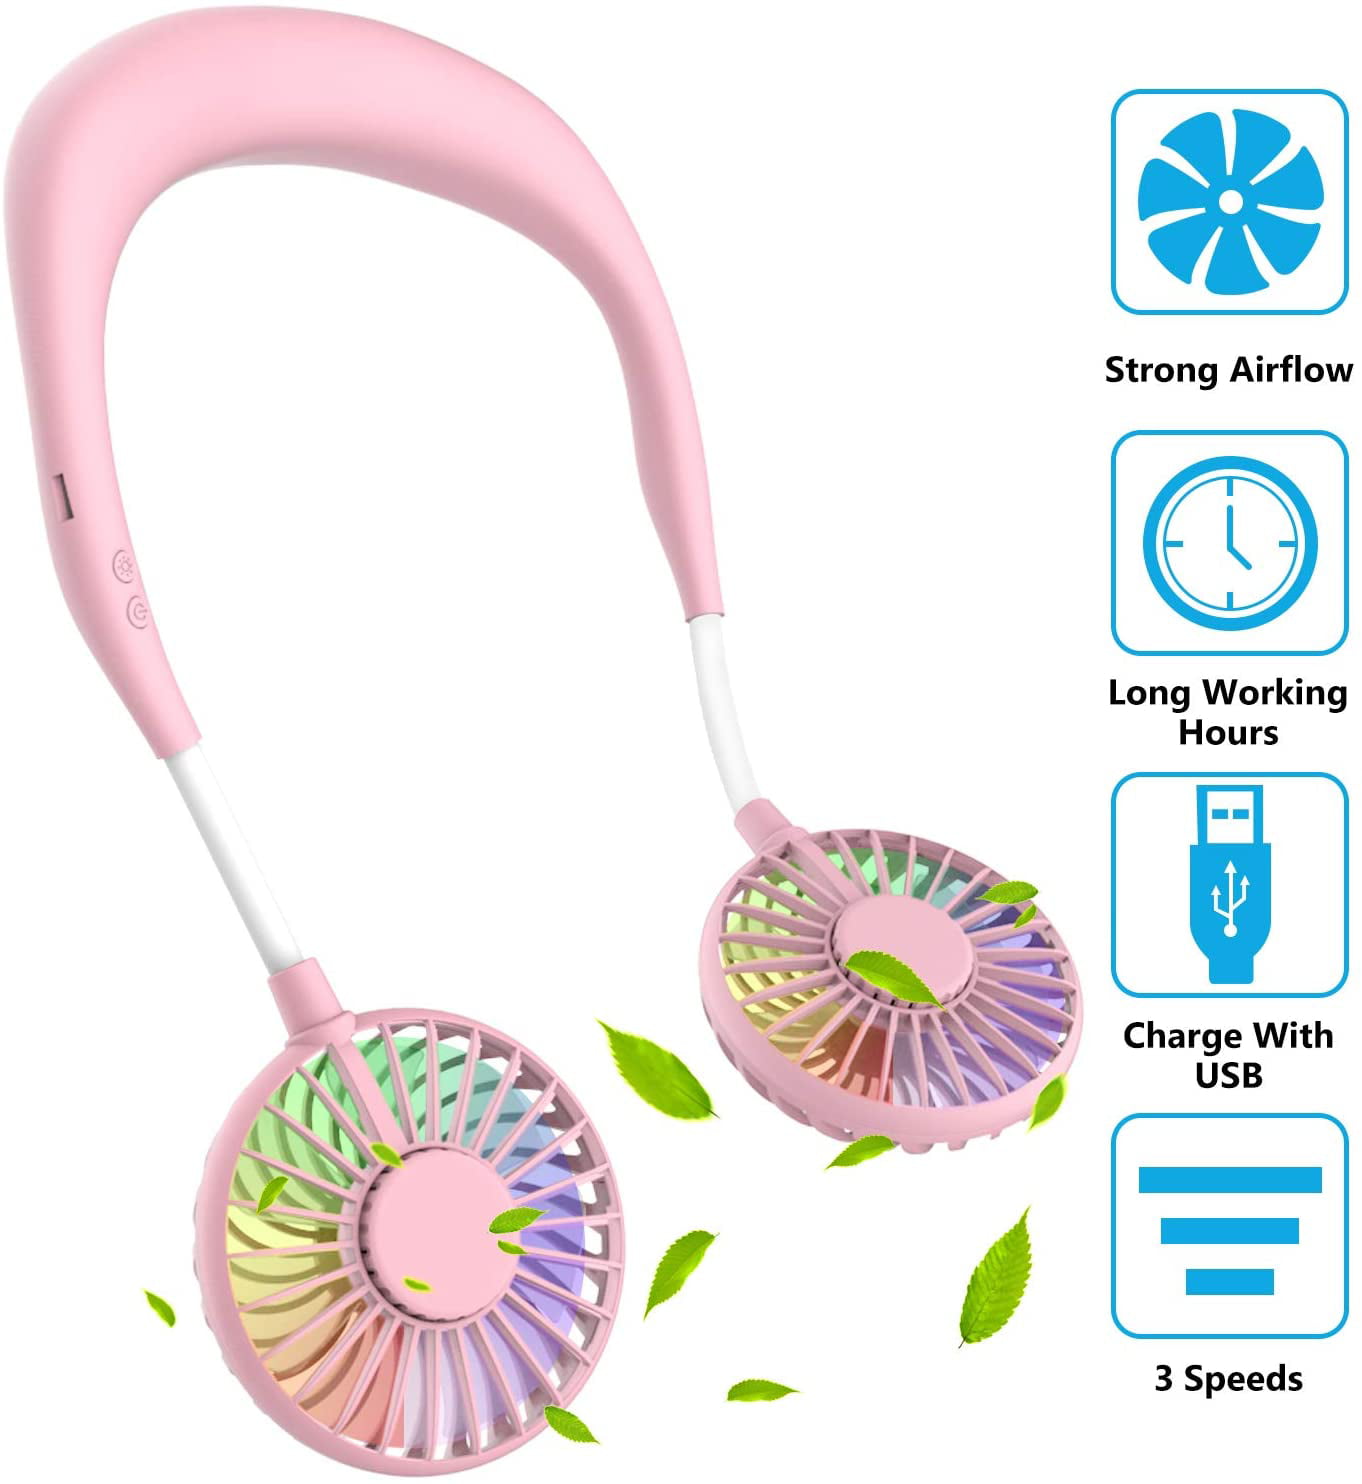 Rechargeable Perfect for Sports Quiet Hand Free USB Personal Fan Pink Portable Mini LED Fan Headphone Neck Hanging Design Fan Internal Rainbow and White Light Traveling and Office 3 Speeds 